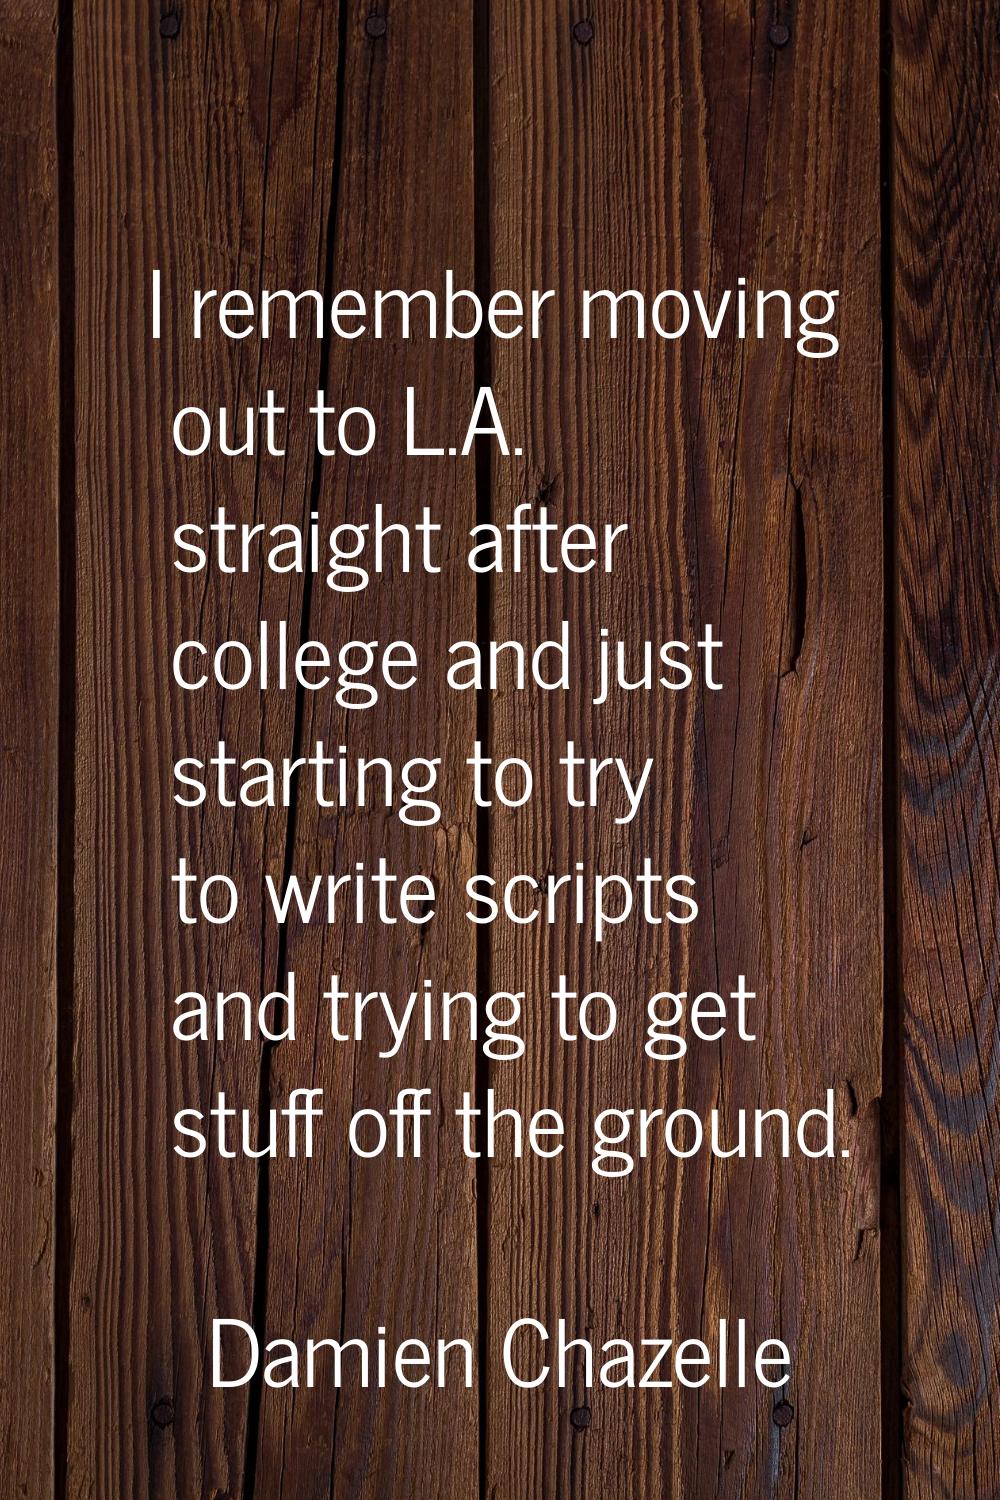 I remember moving out to L.A. straight after college and just starting to try to write scripts and 